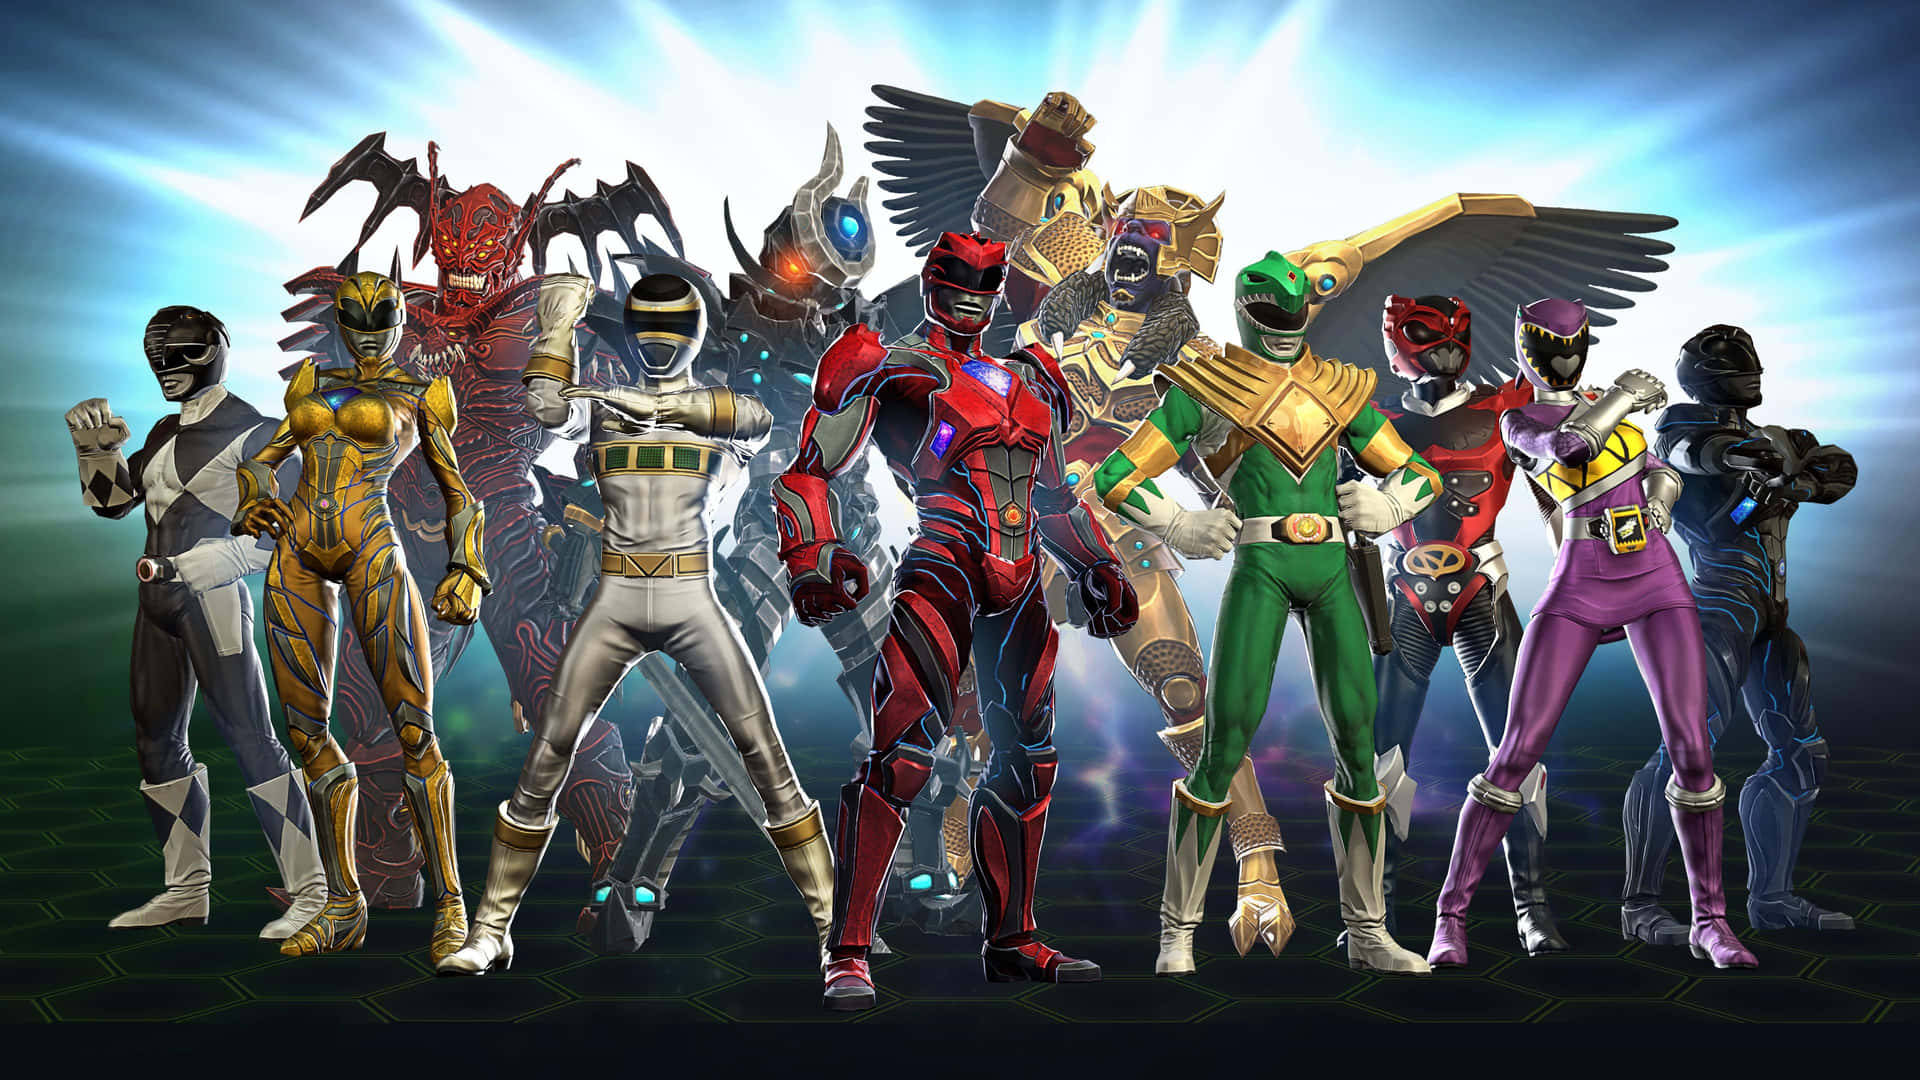 Mighty Morphin Power Rangers united and ready for action!